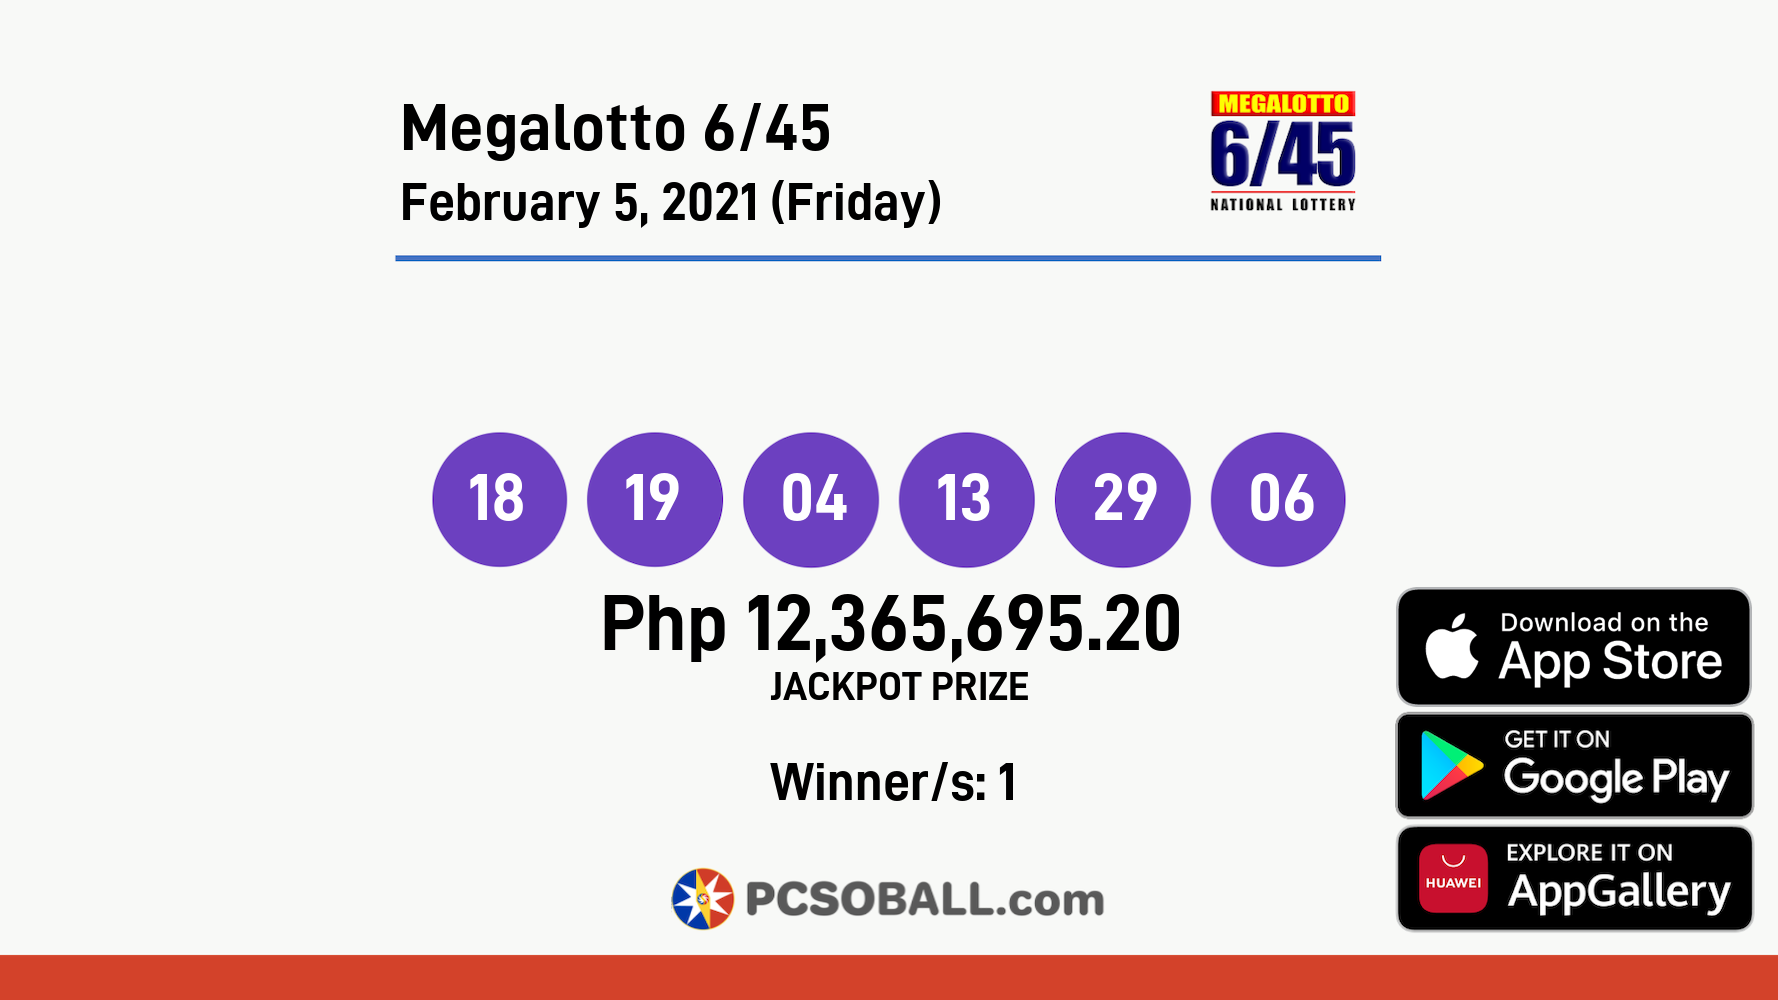 Megalotto 6/45 February 5, 2021 (Friday) Result